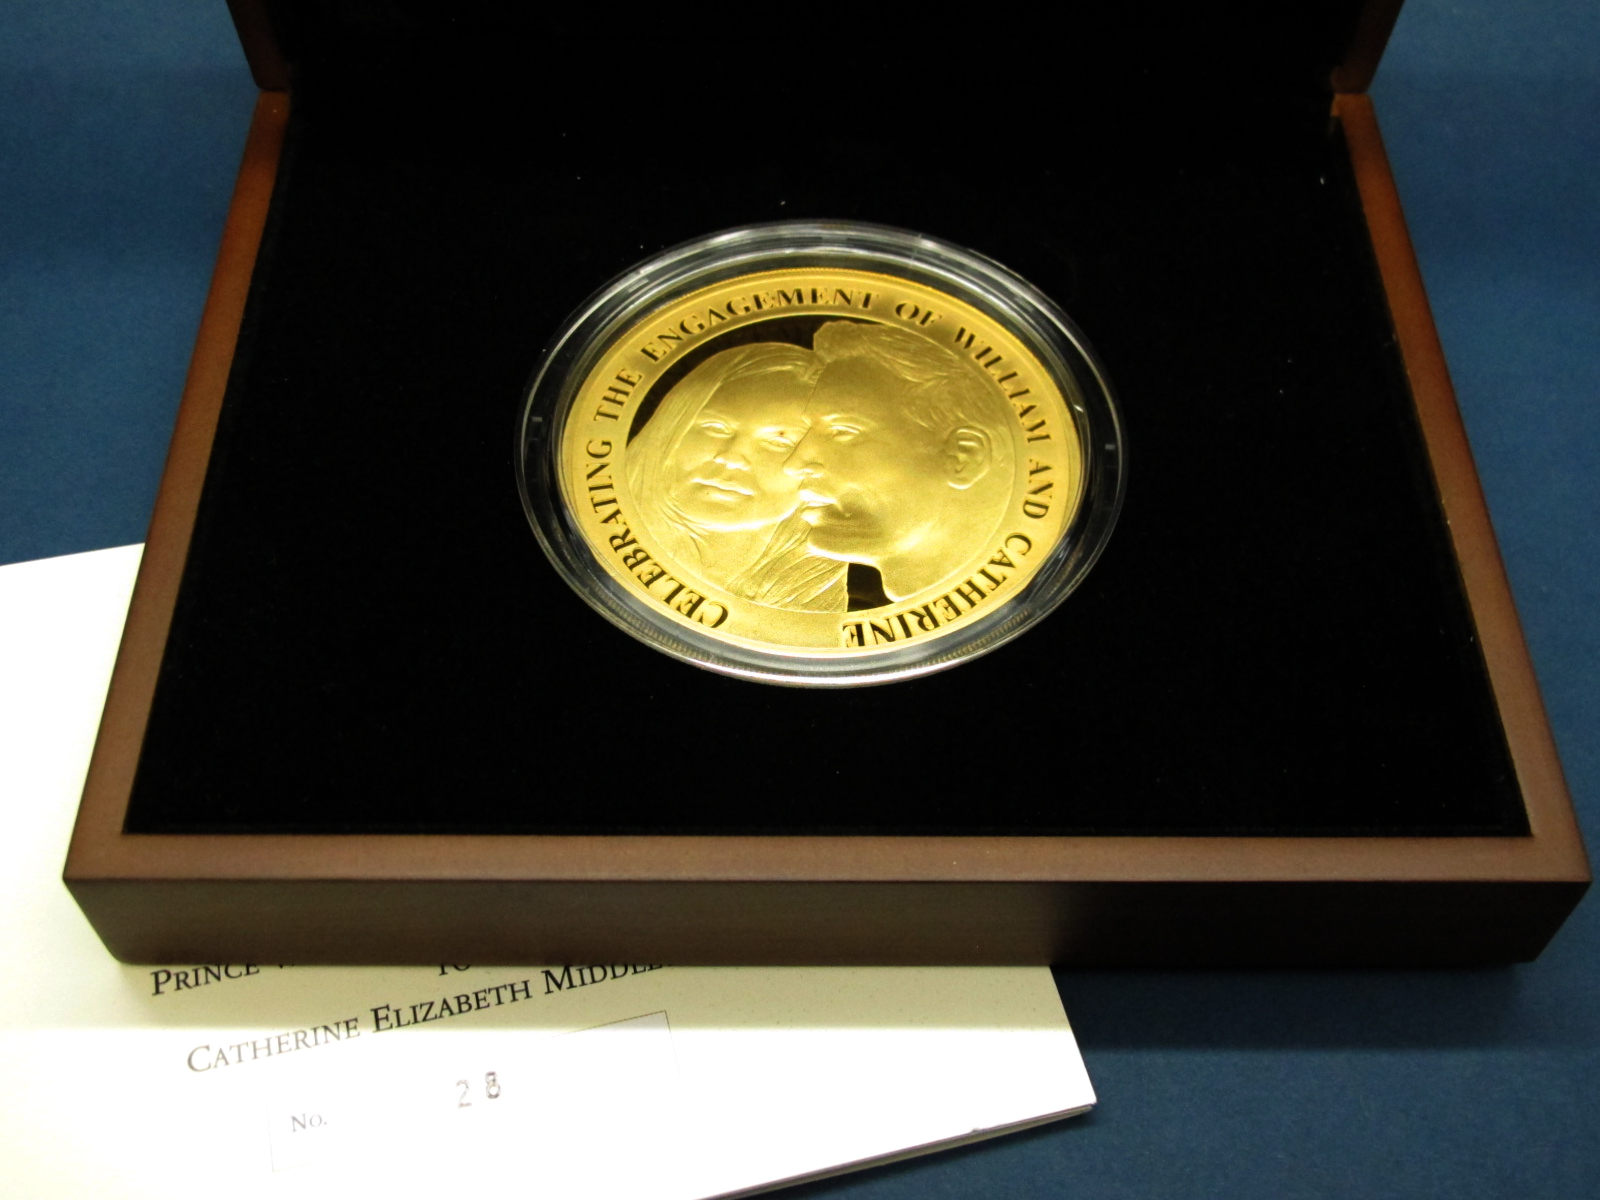 Alderney 2010 'A Royal Engagement' Ten Pounds Gold Proof 5oz Coin, certified No.28 of 30, cased.